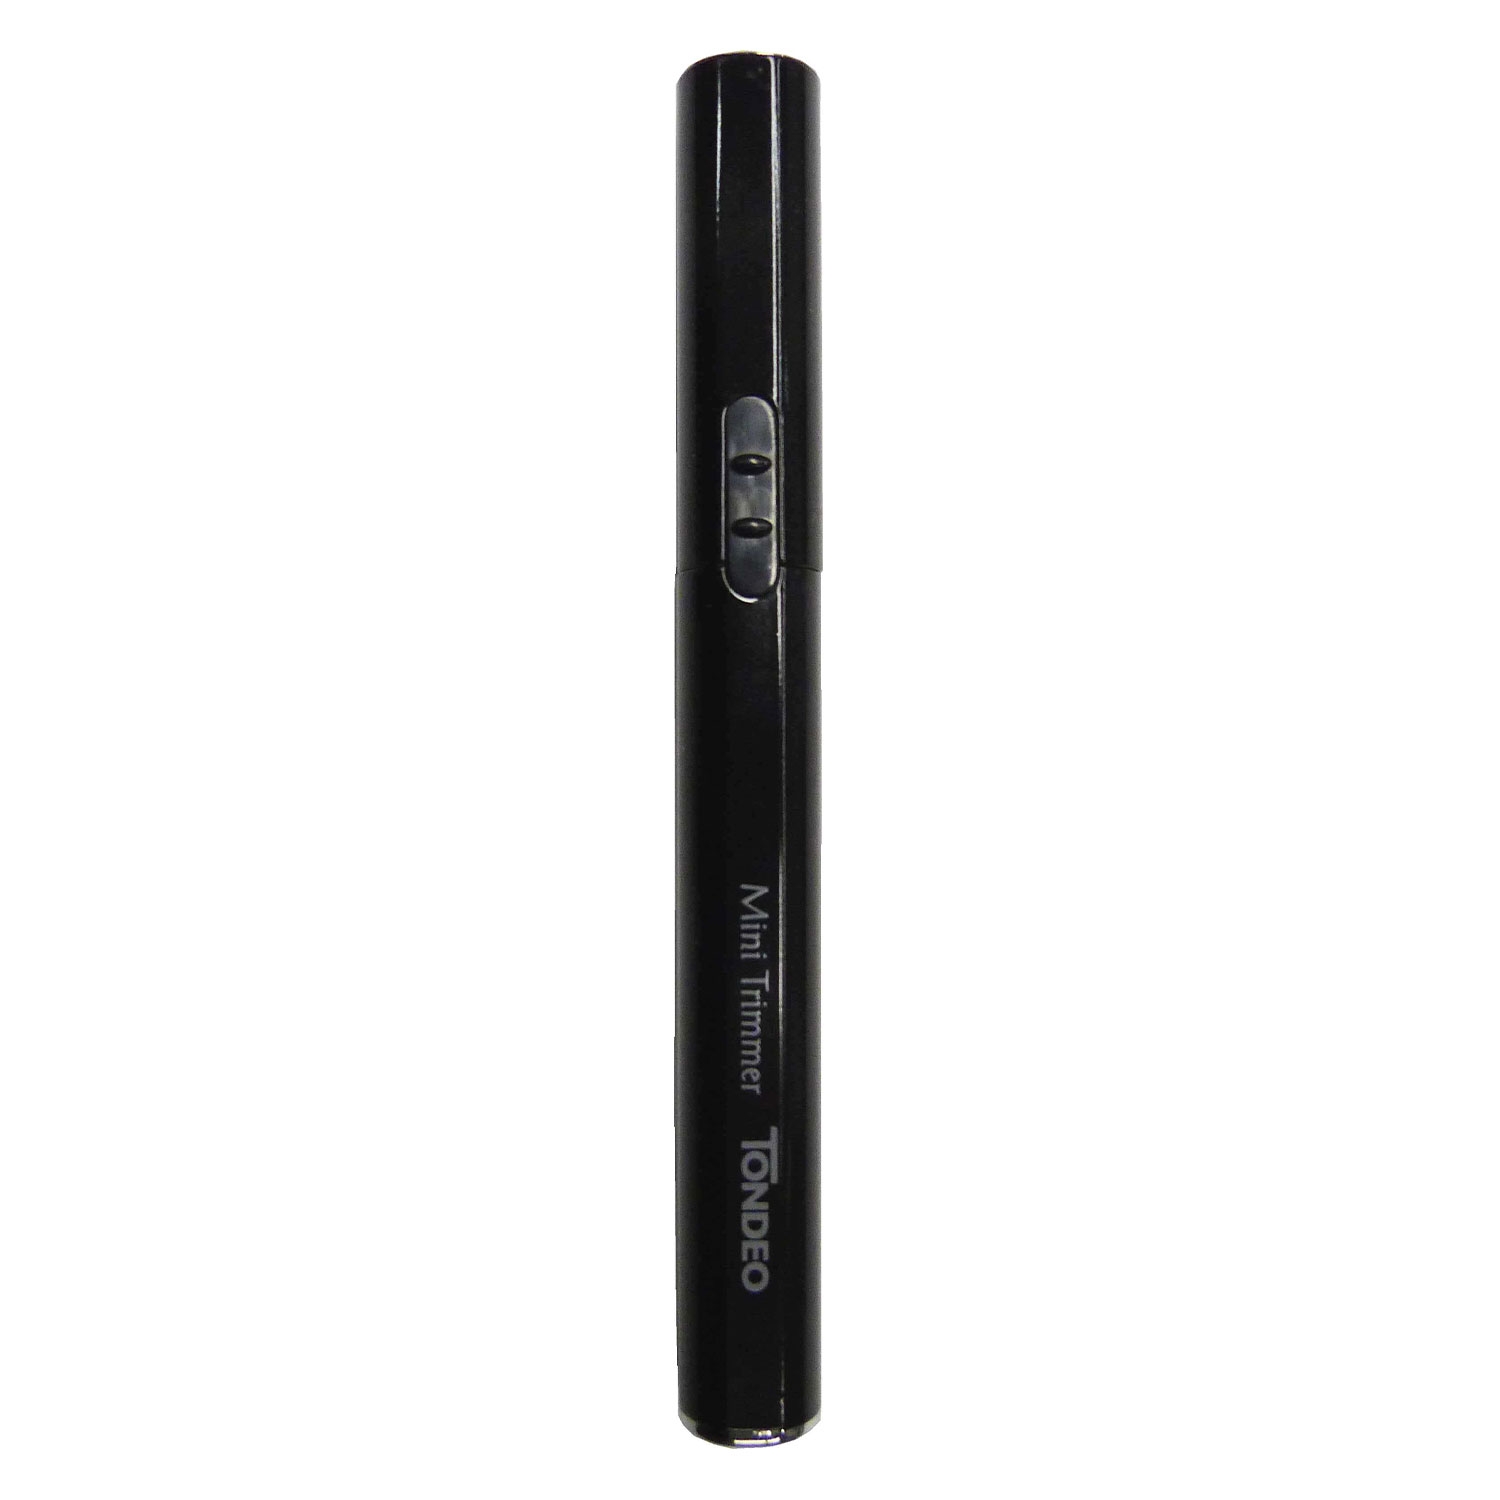 Product image from Tondeo Hair Clippers - Tondeo Mini-Trimmer Black